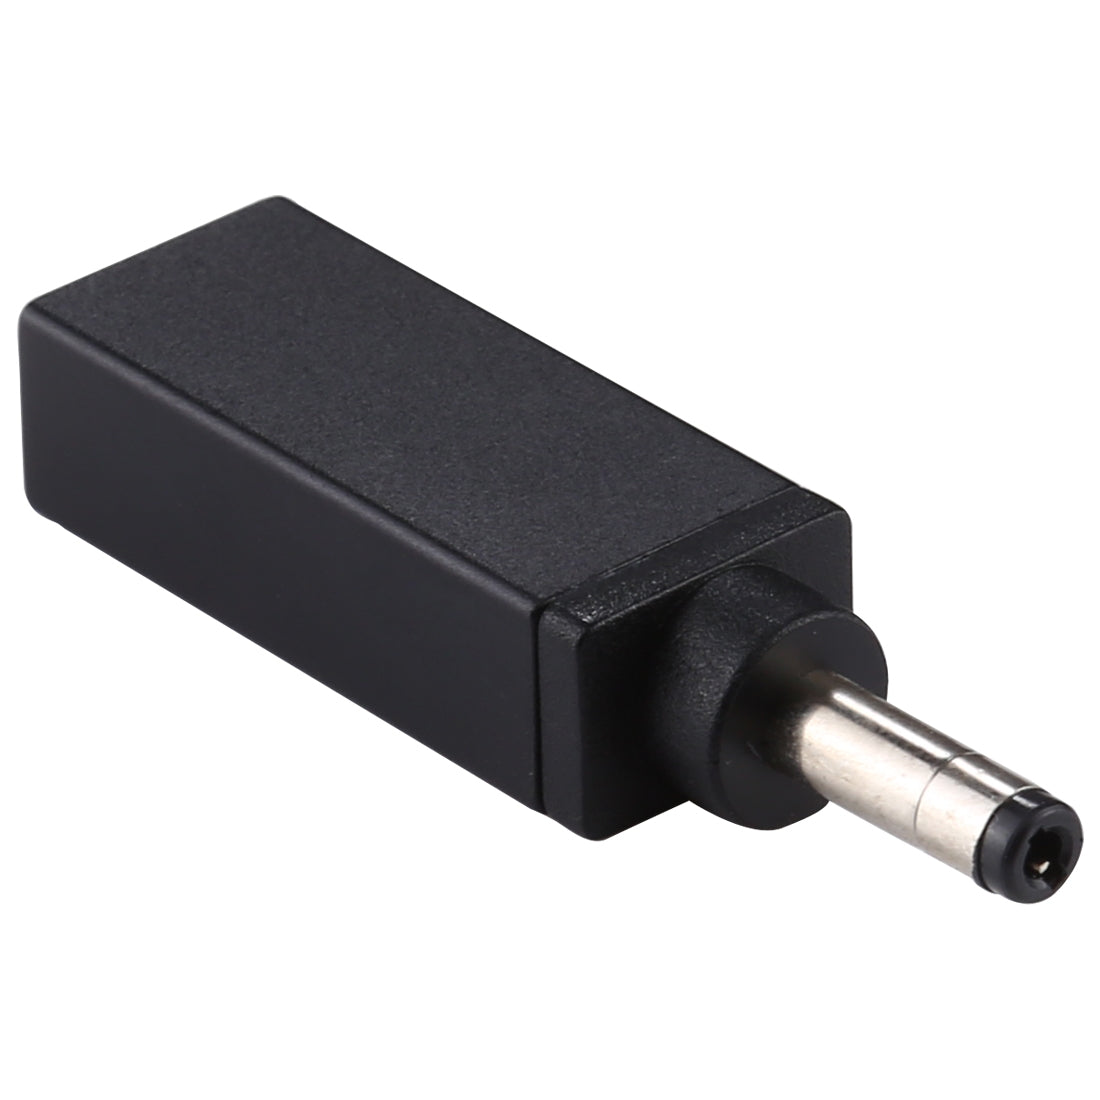 PD 18.5V-20V 4.0x1.7mm Male Adapter Connector